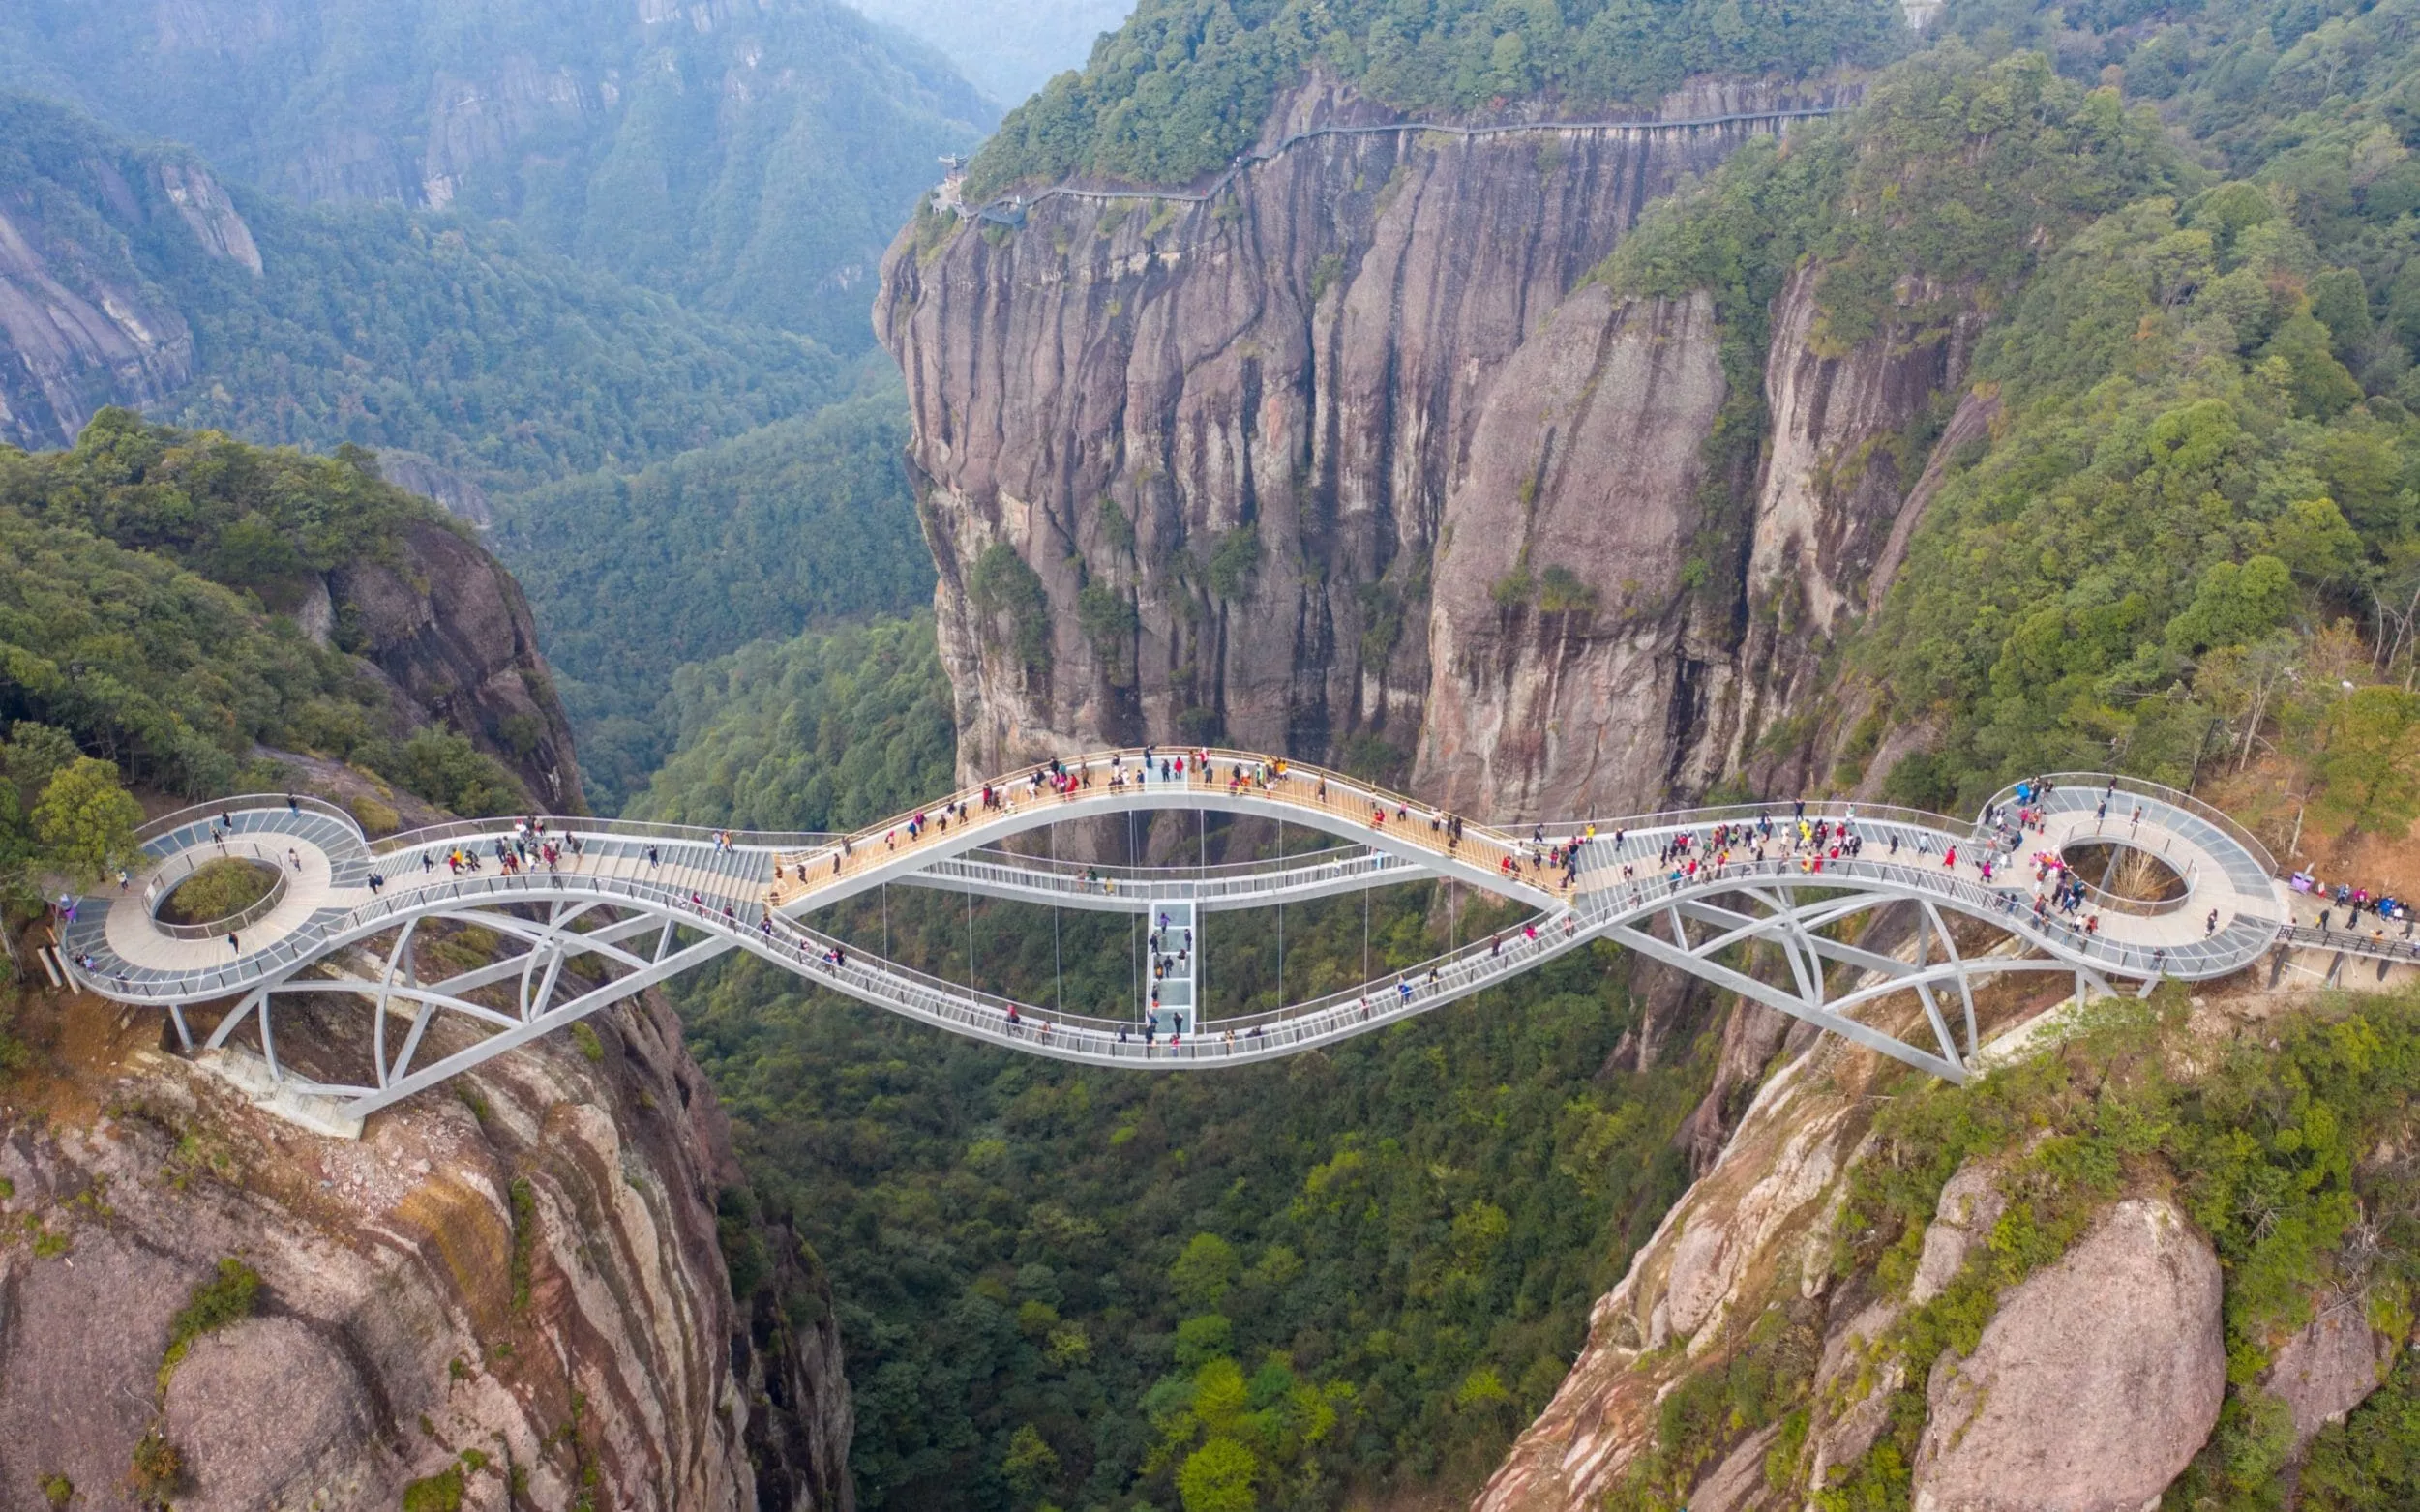 Ruyi Bridge in China, East Asia | Architecture,Observation Decks - Rated 3.6